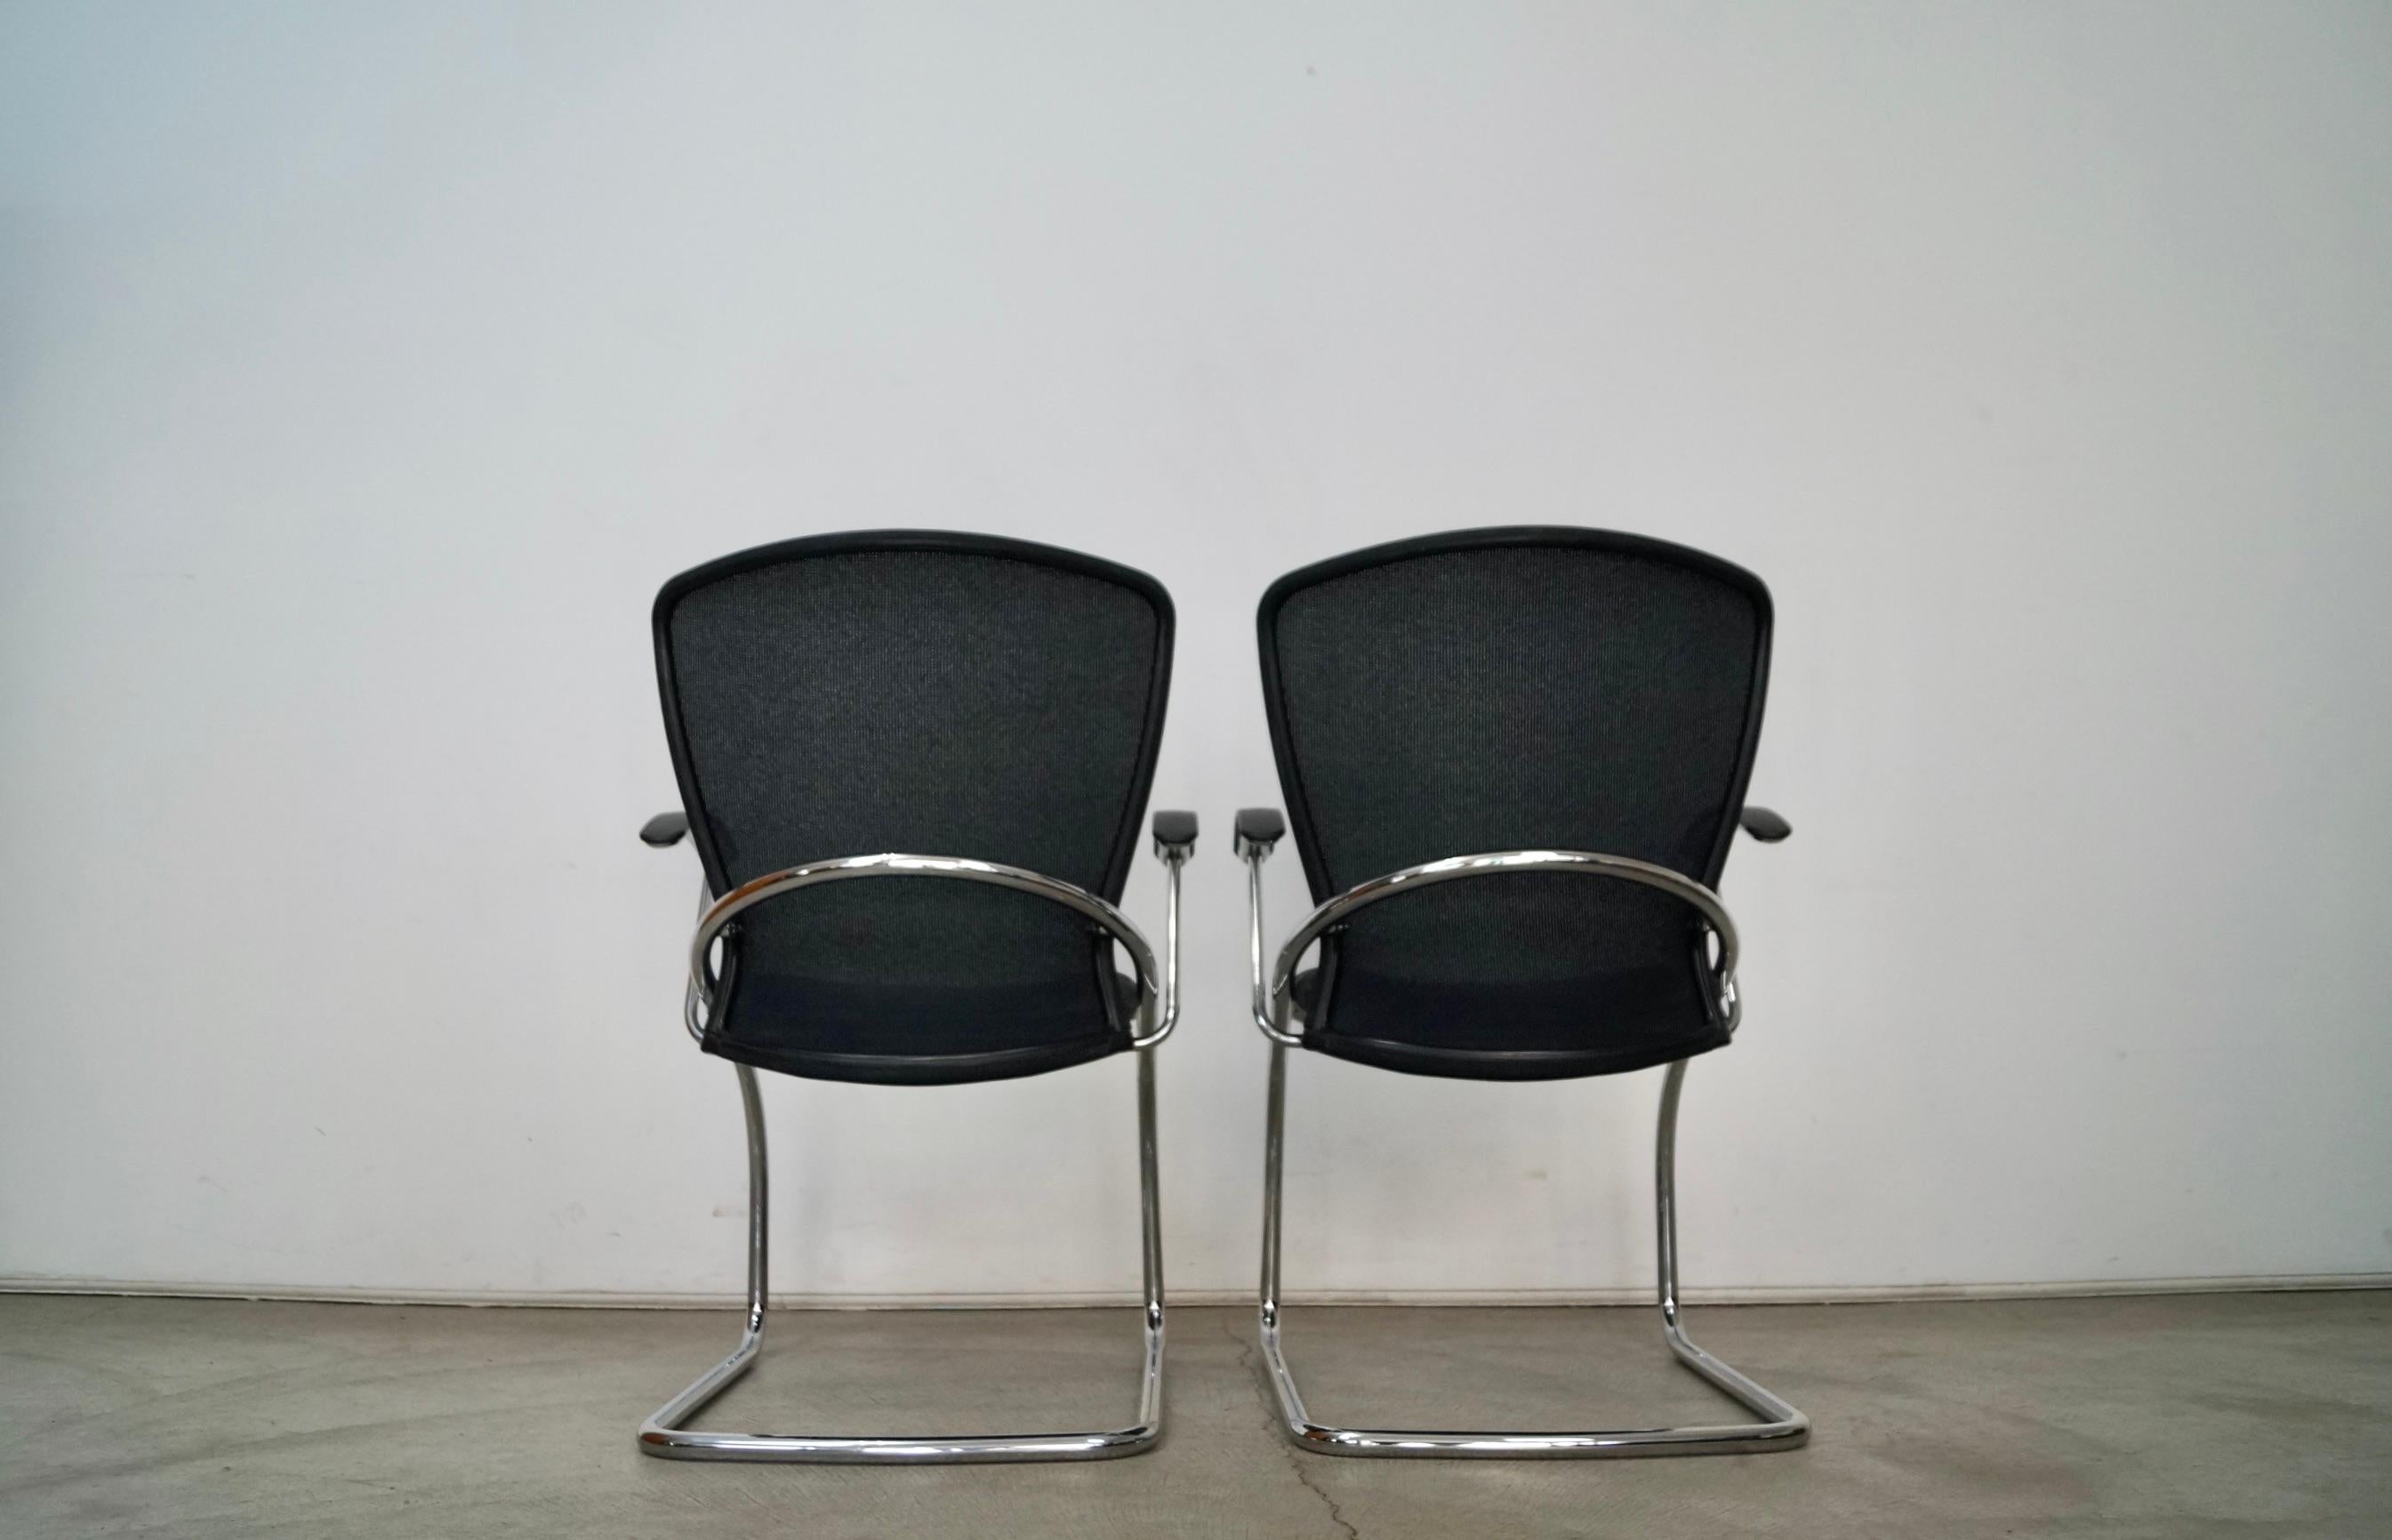 1990's Postmodern German Chrome Cantilever Arm Chairs - A Pair For Sale 3